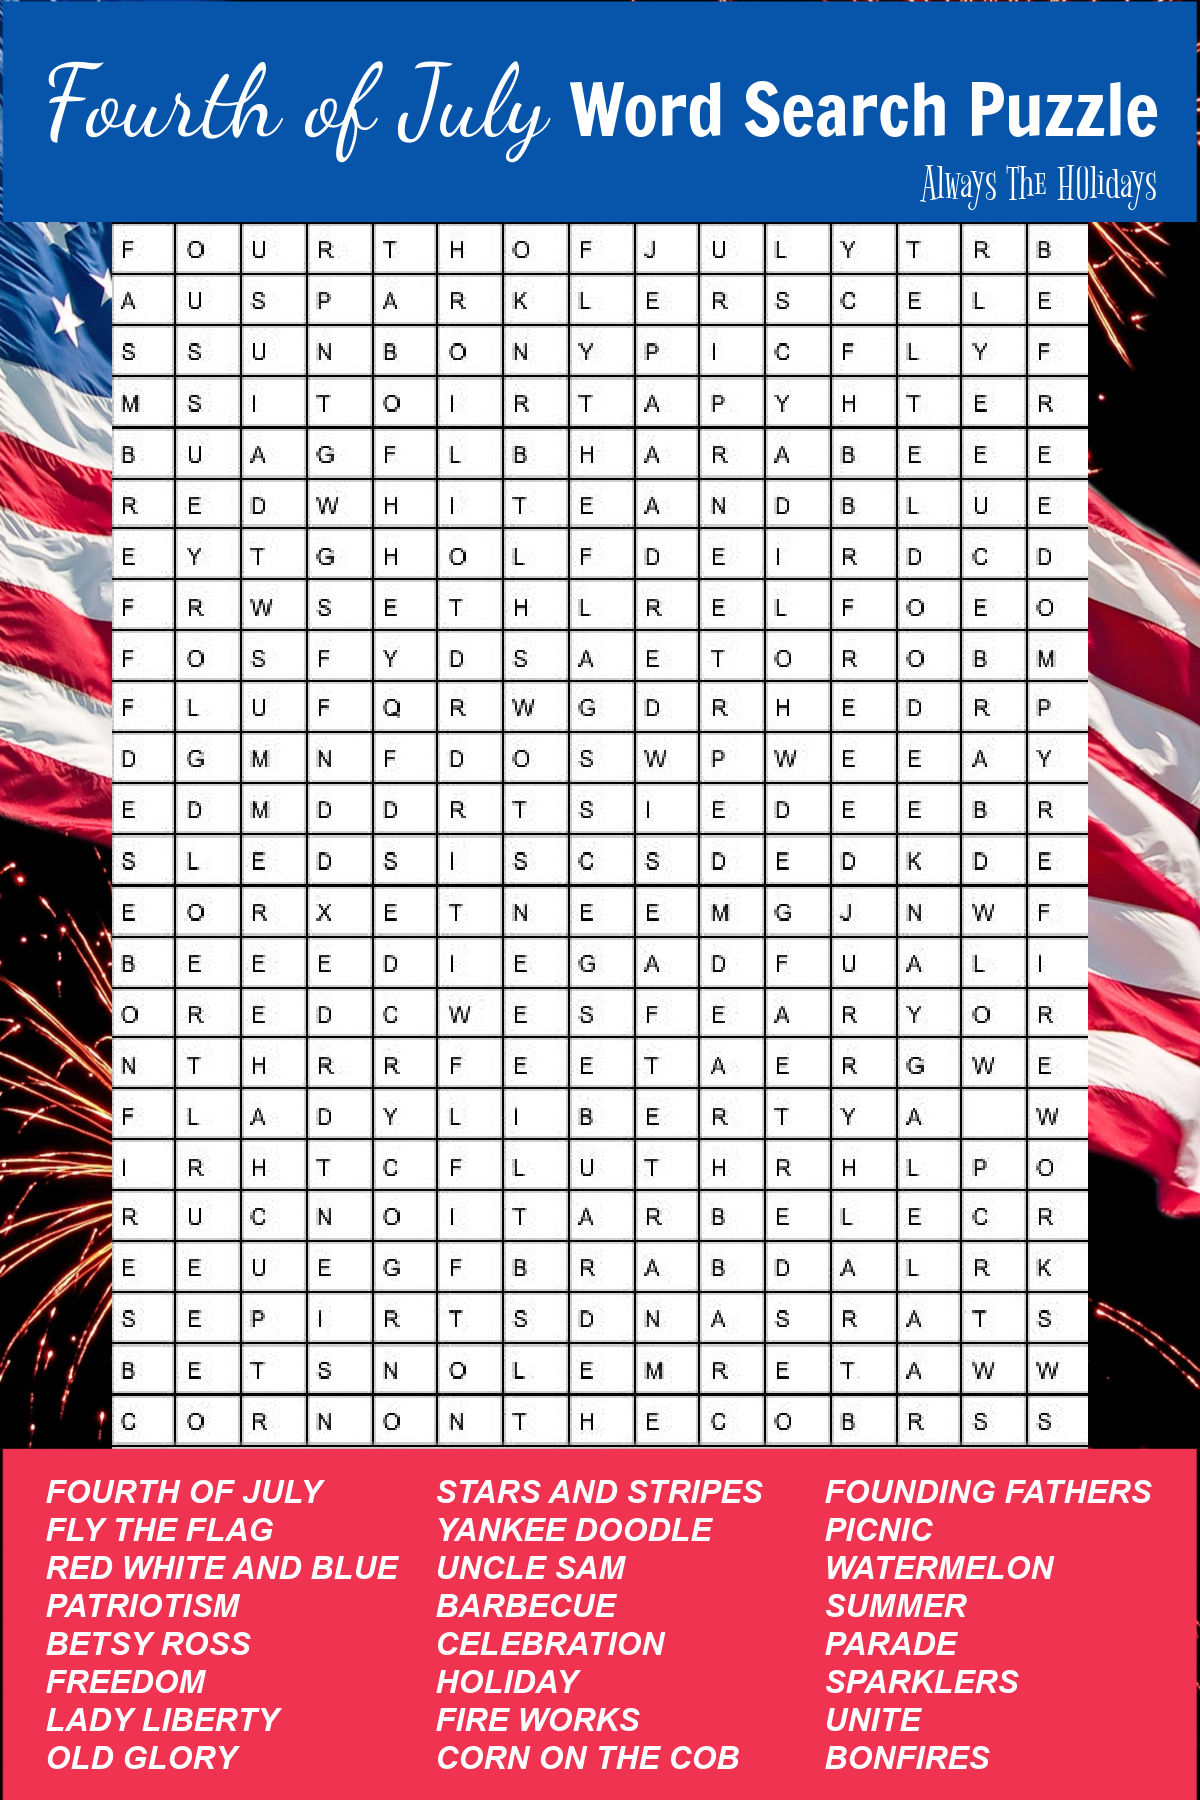 Fourth of July word search puzzle with list of words to find.